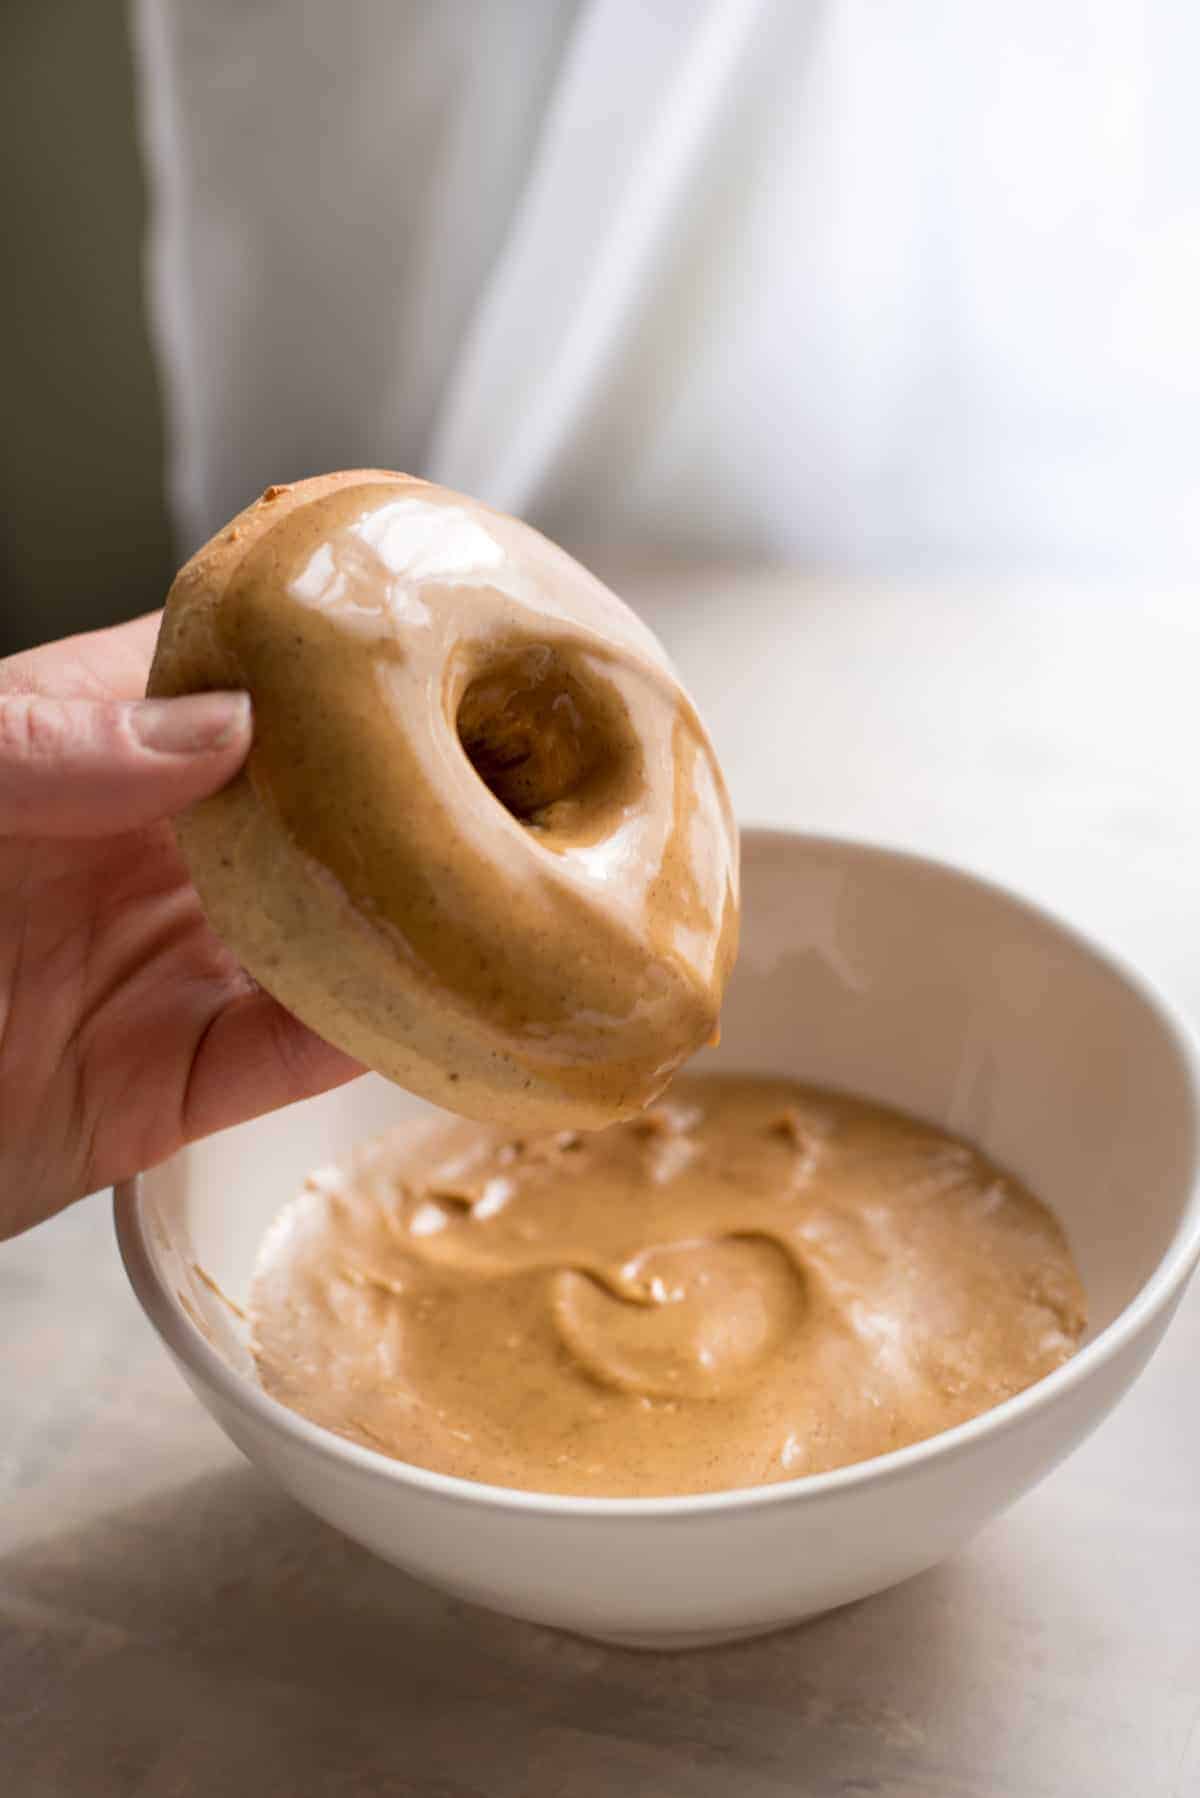 A white bowl contains gingerbread glaze. A hand is holding a doughnut which has been dipped into the glaze on top. The hand is holding the doughnut over the bowl to catch ay excess drips.